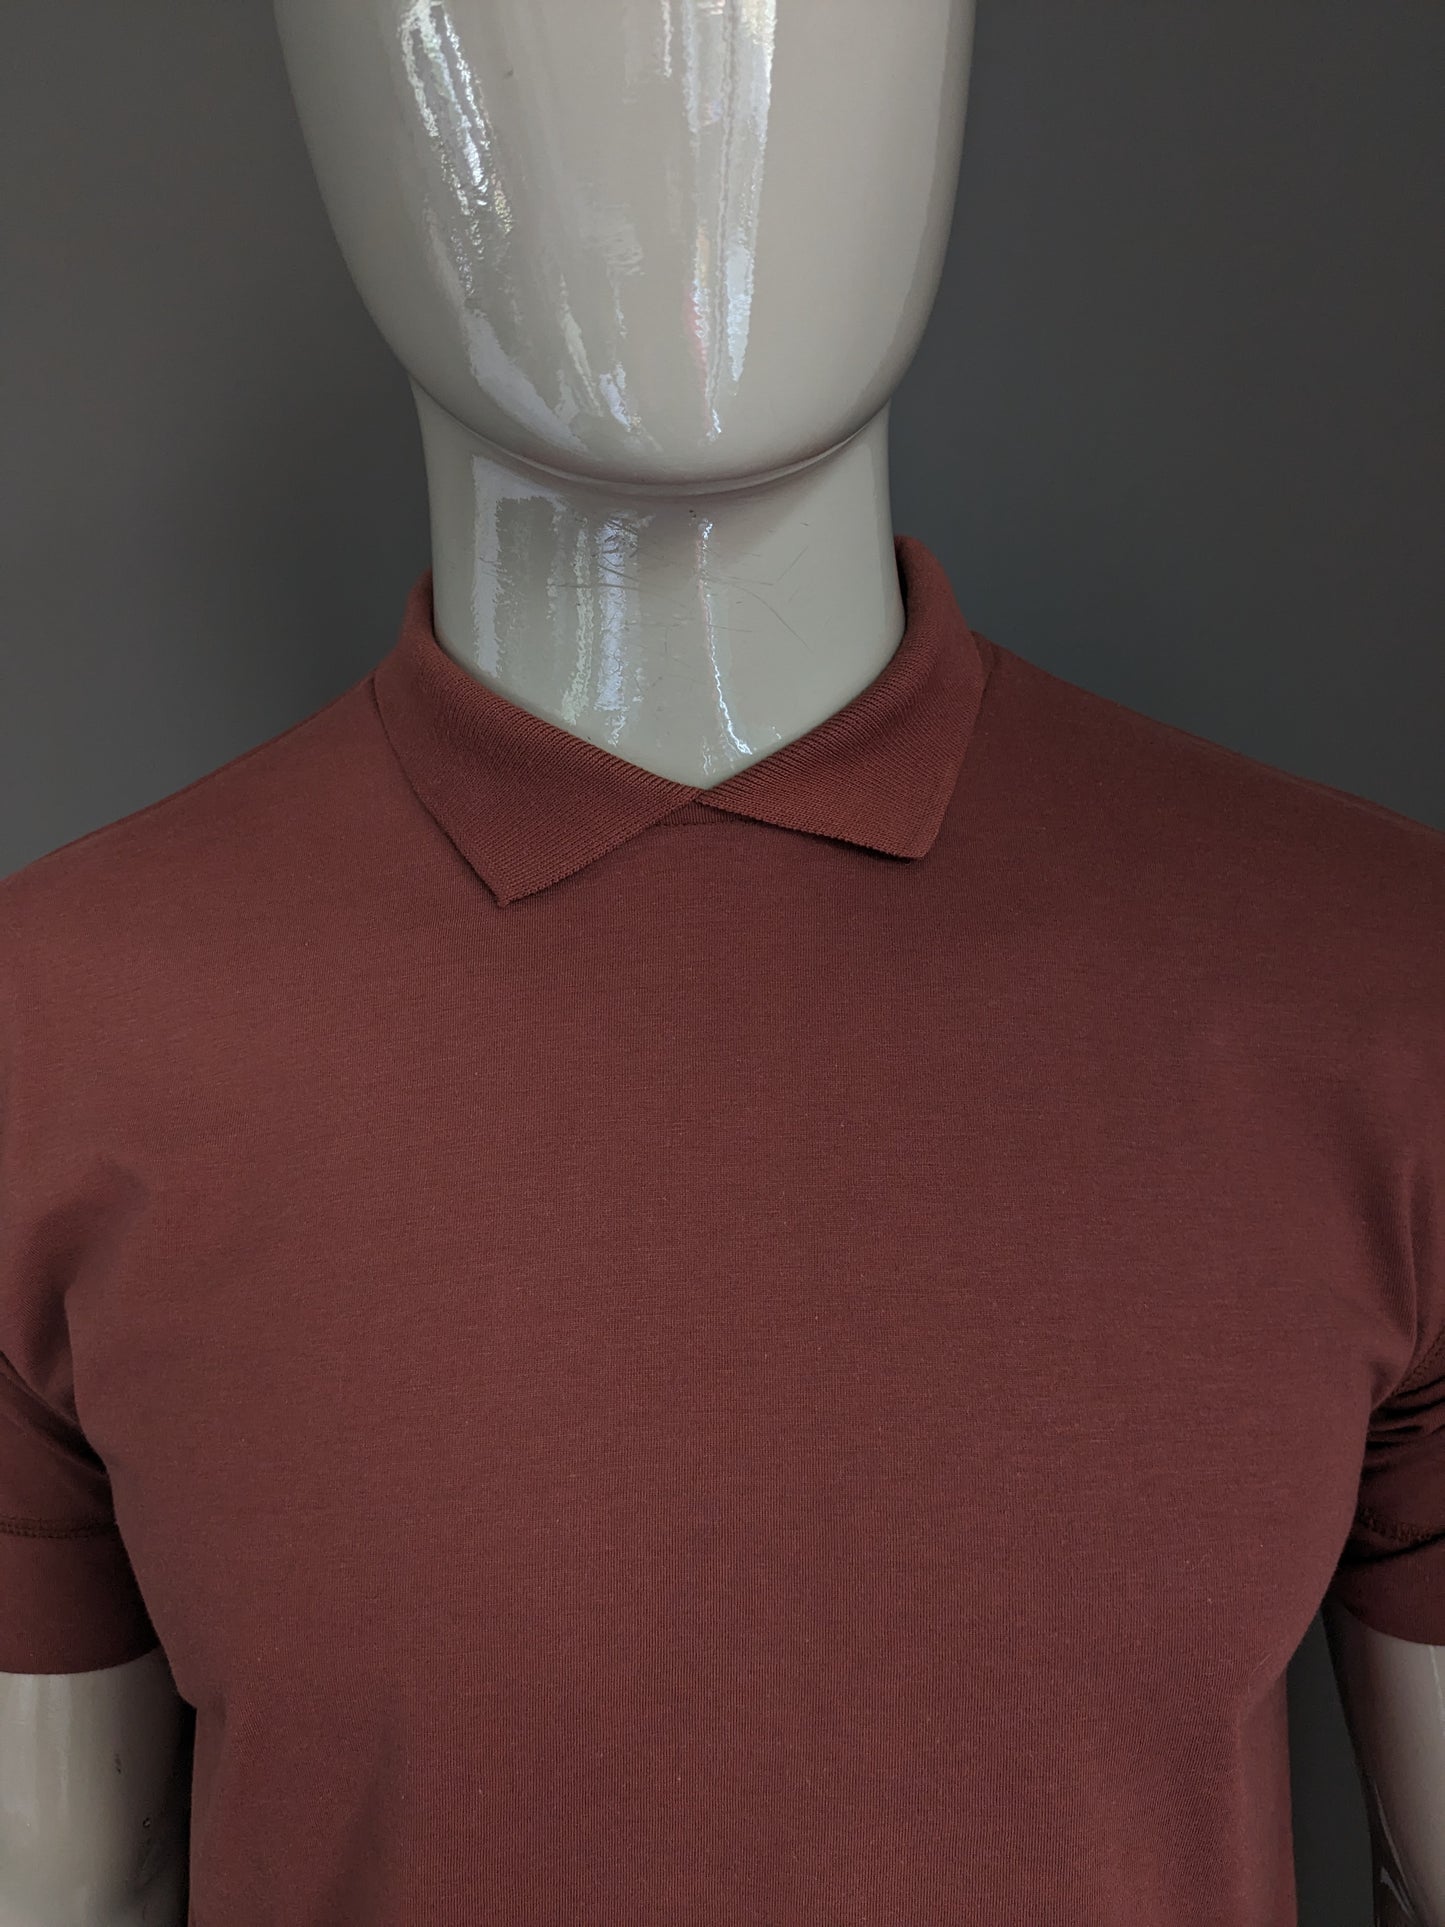 Vintage Live Coverage Polo with separate collar. Brown colored. Size M.